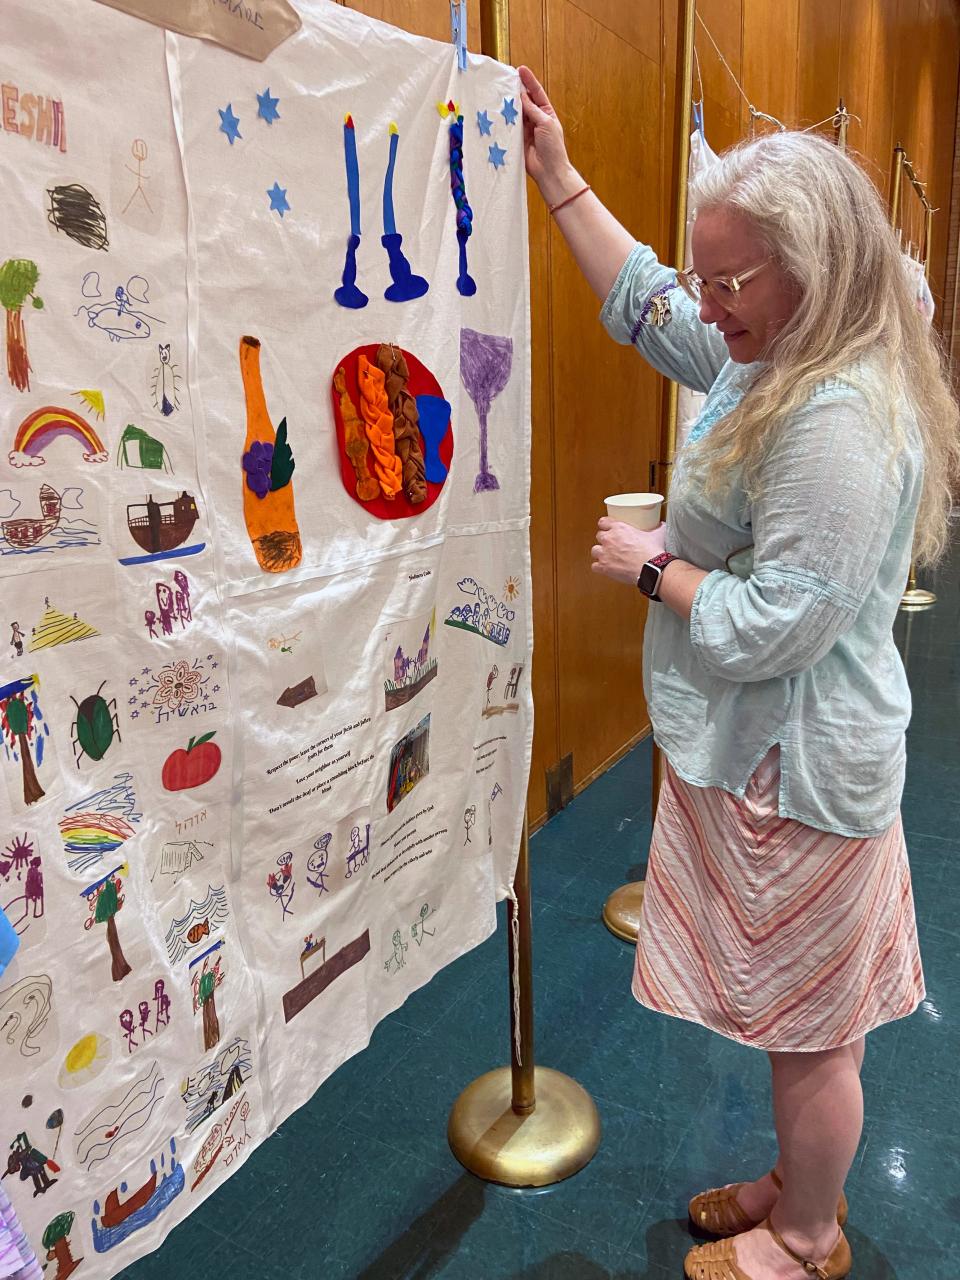 Ardis Steele, Temple B'nai Israel youth engagement specialist, shows Torah youth crafts on display during the Shavuot campout at Temple B'nai Israel in Oklahoma City.